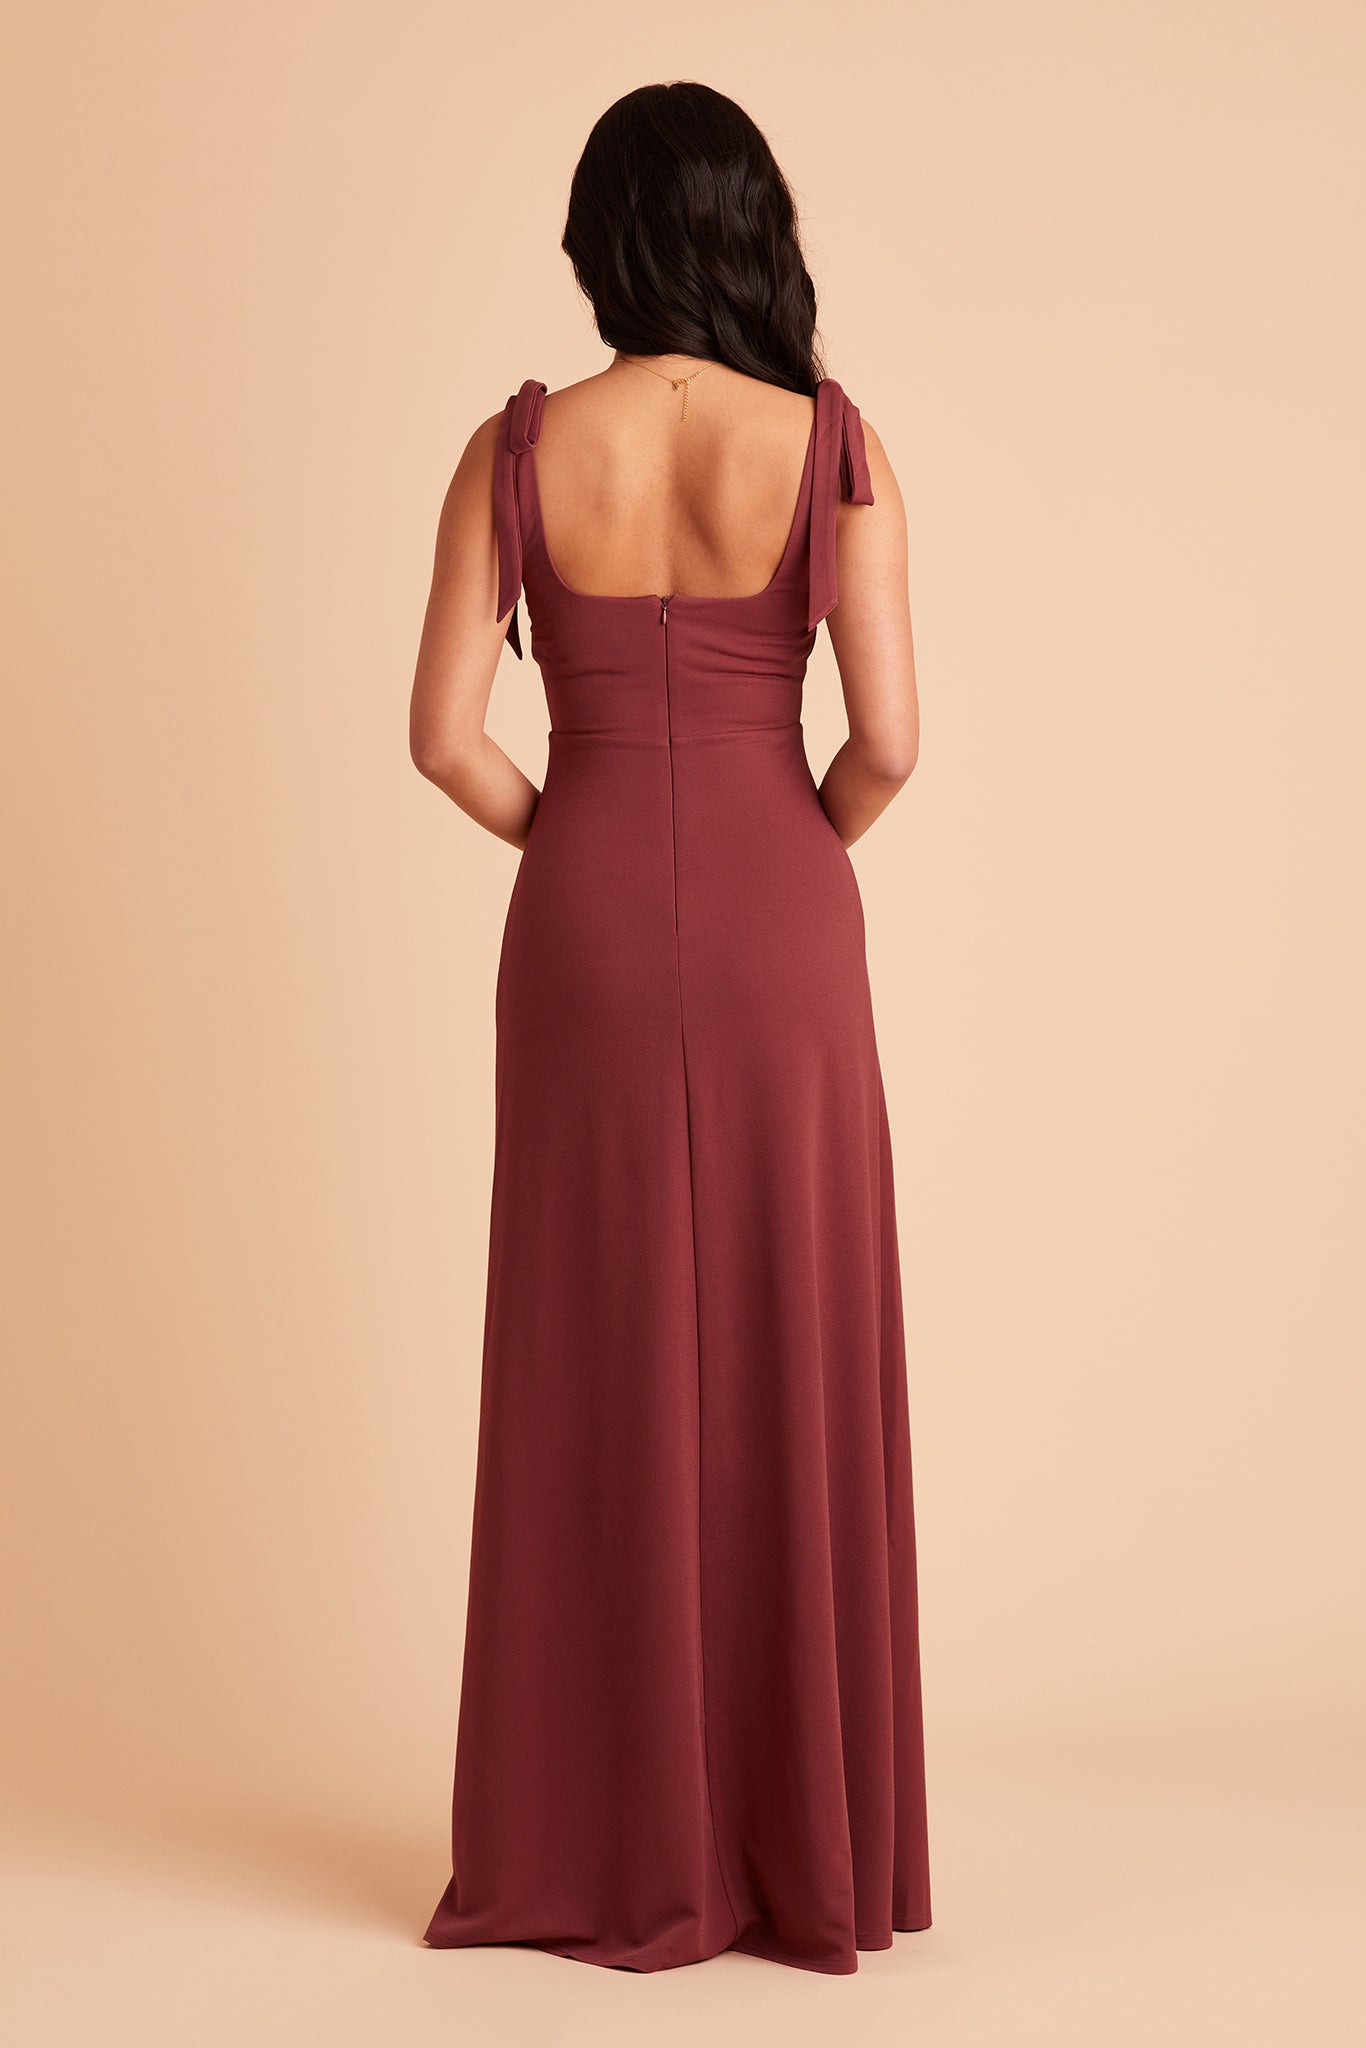 Alex convertible bridesmaid dress with slit in rosewood crepe by Birdy Grey, back view